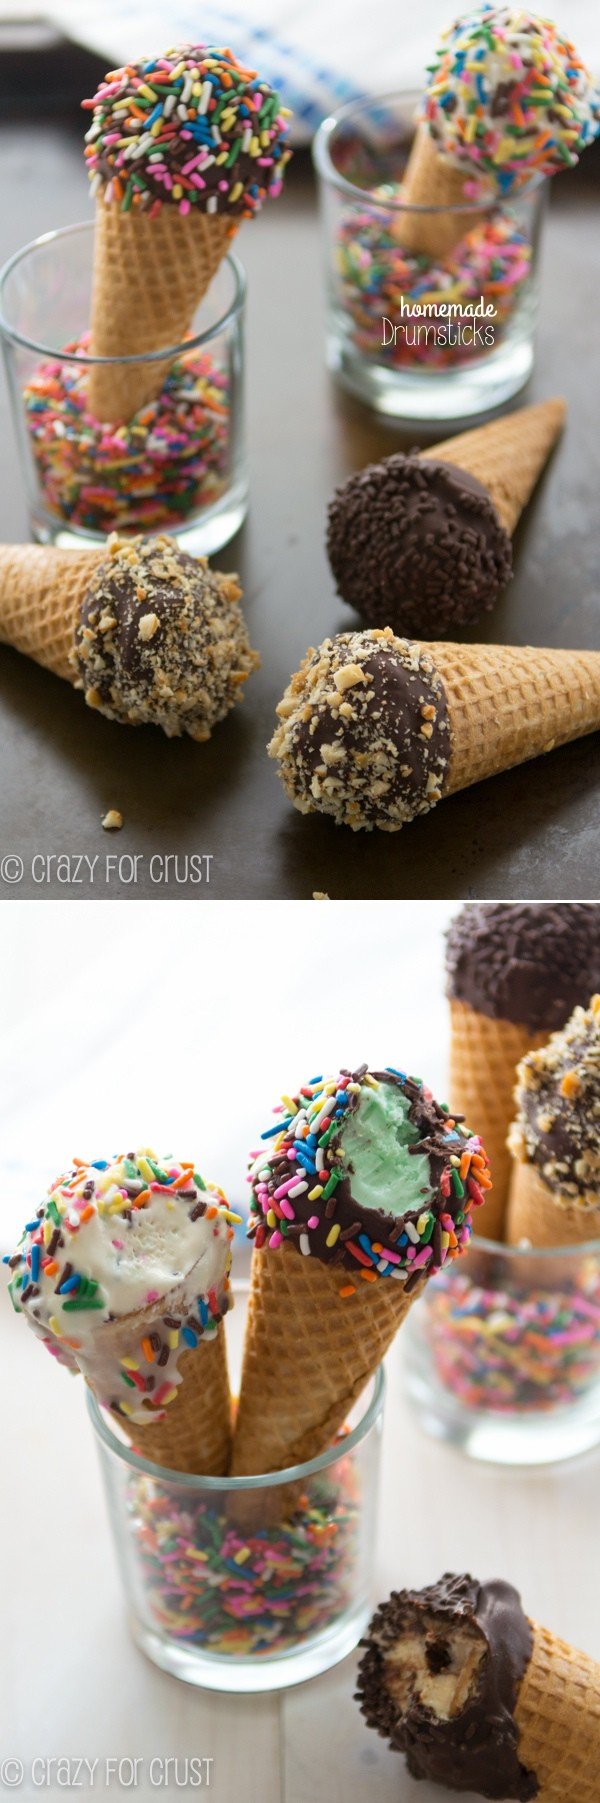 Homemade Drumsticks - easy to make using your favorite ice cream and toppings!